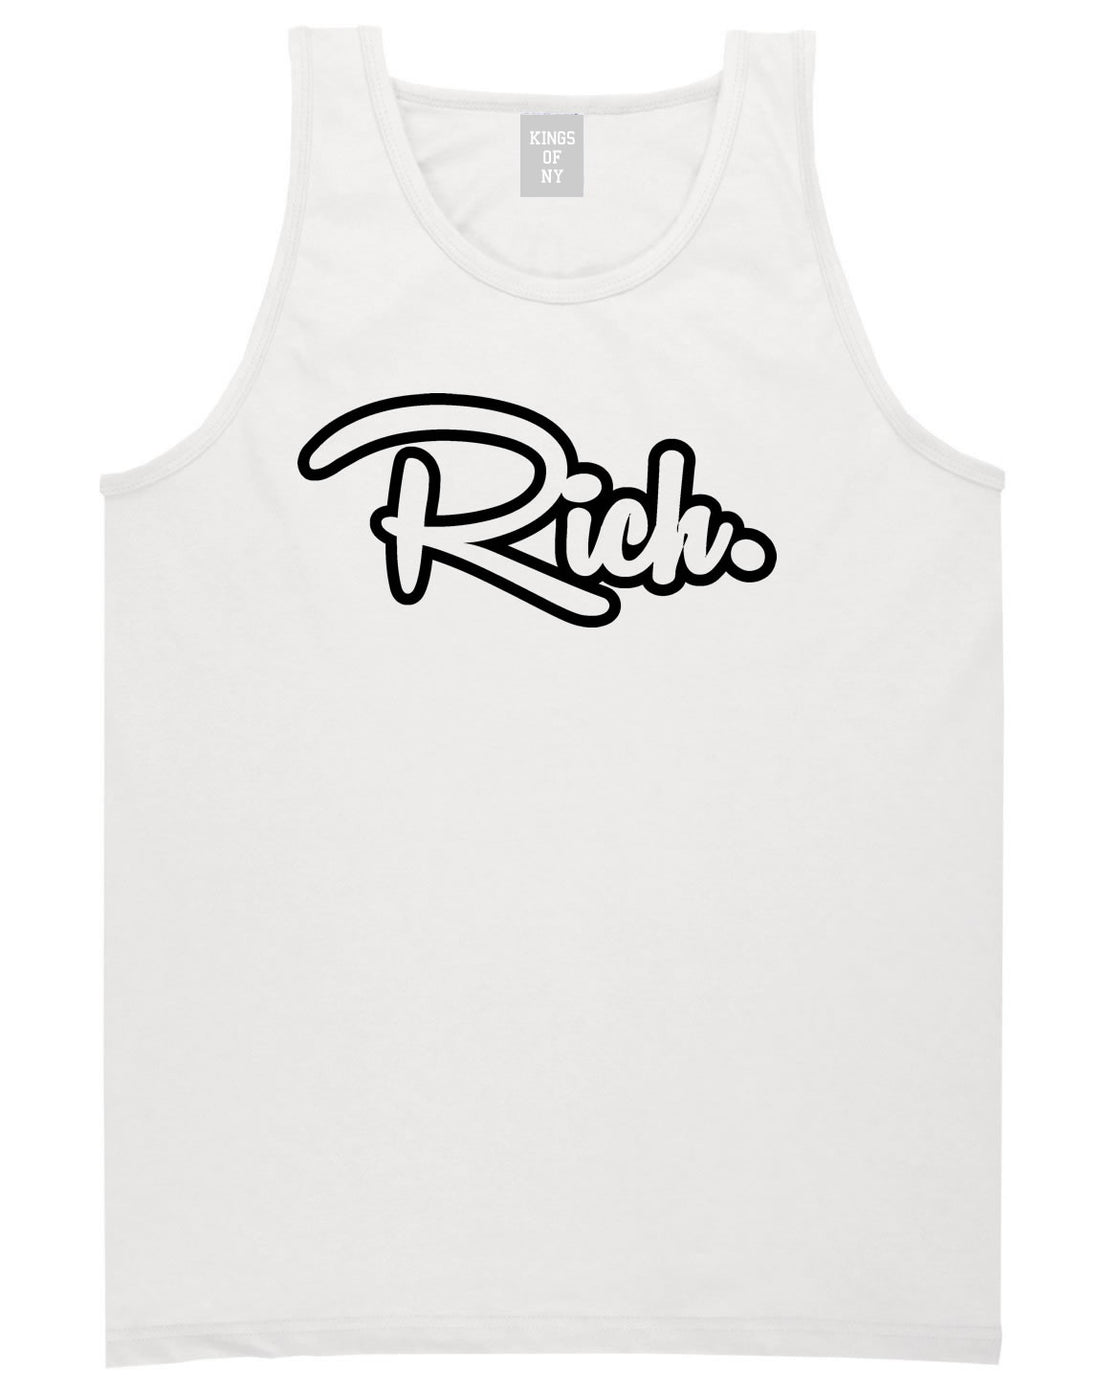 Rich Money Fab Style New York Richie NYC Tank Top In White by Kings Of NY